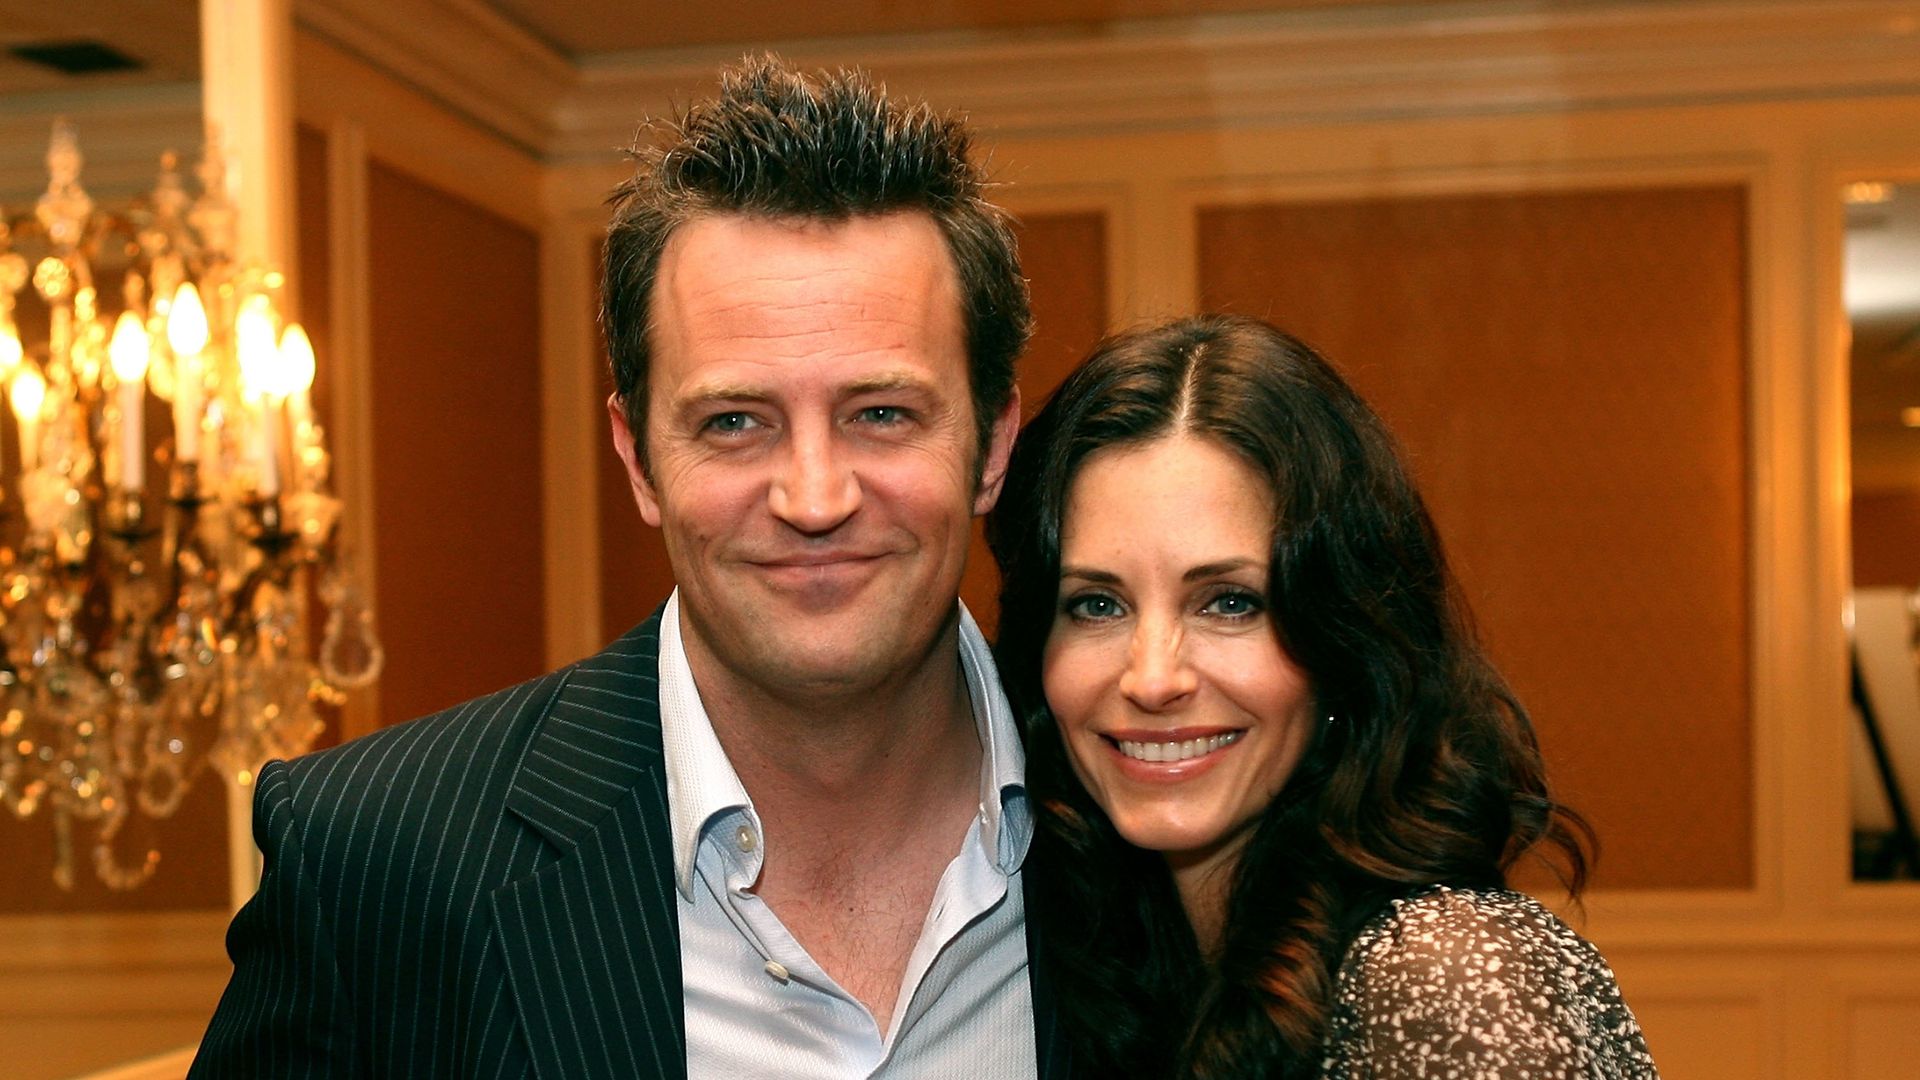 Matthew Perry and actress Courteney Cox Arquette mingle at the AFI Associates luncheon honoring Hollywood's Arquette family with the 6th Annual "Platinum Circle Award" held at the Regent Beverly Wilshire Hotel on May 10, 2006 in Beverly Hills, California